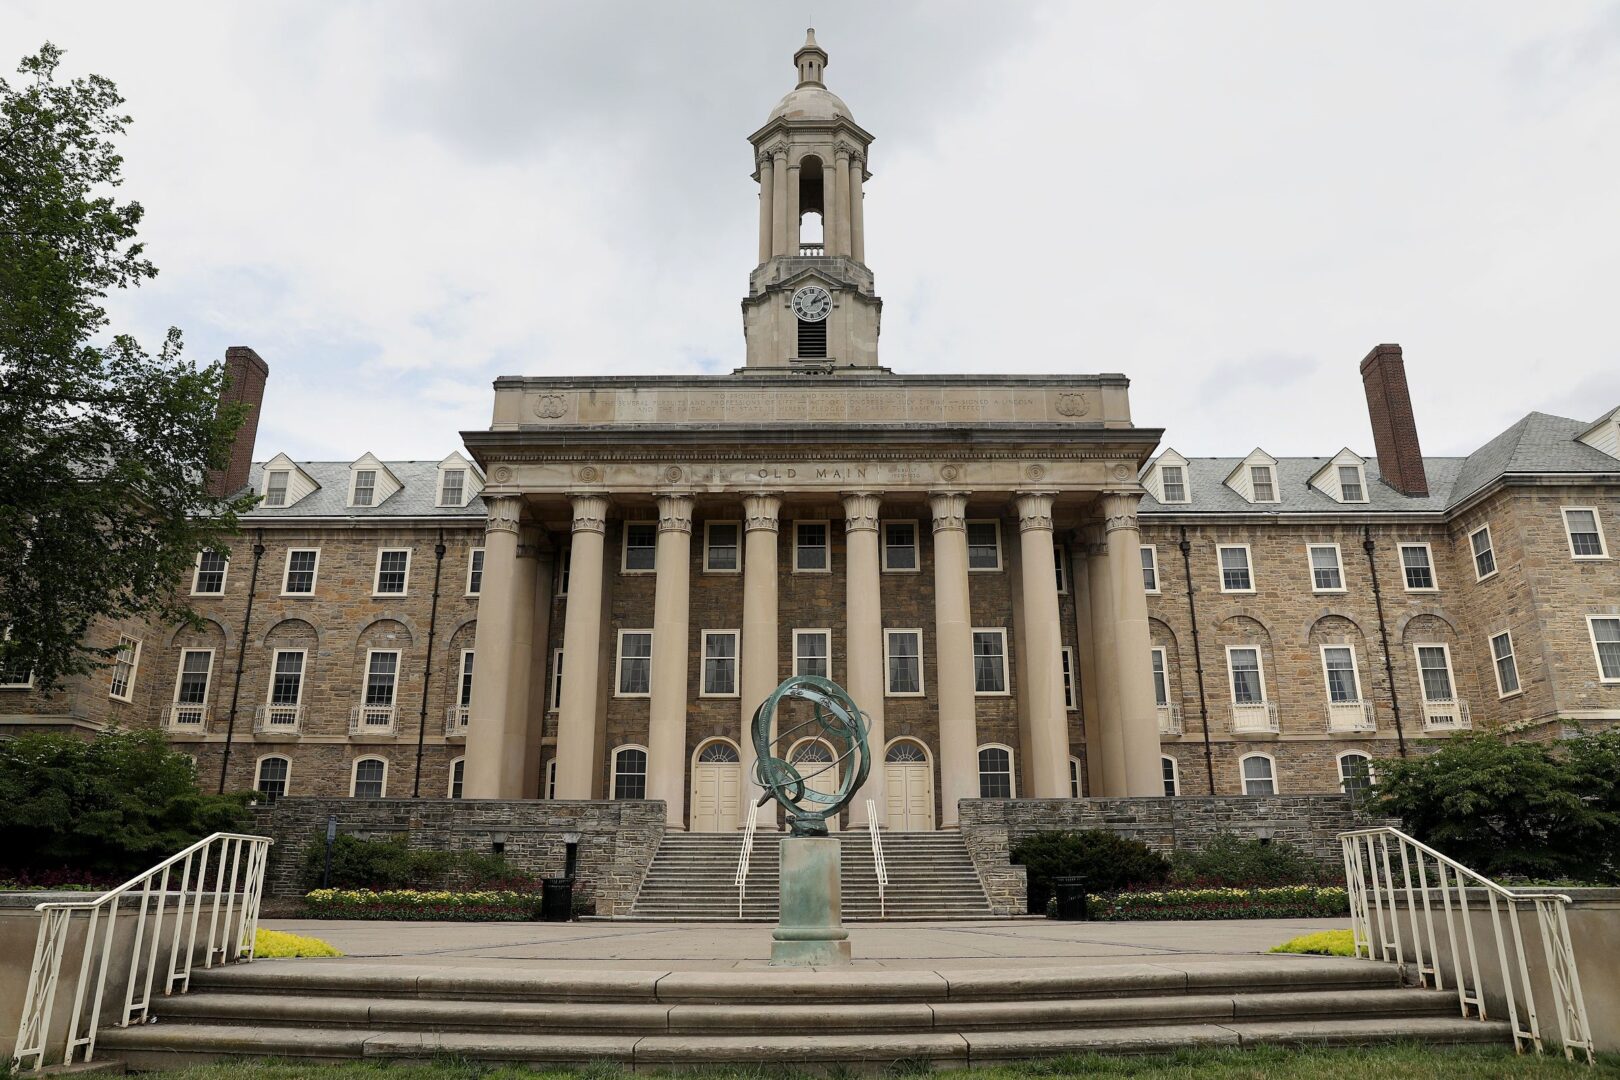 While it’s common for boards to cover the cost of doing business, details of the spending come as the university raises tuition and slashes spending to overcome a $127 million budget deficit.